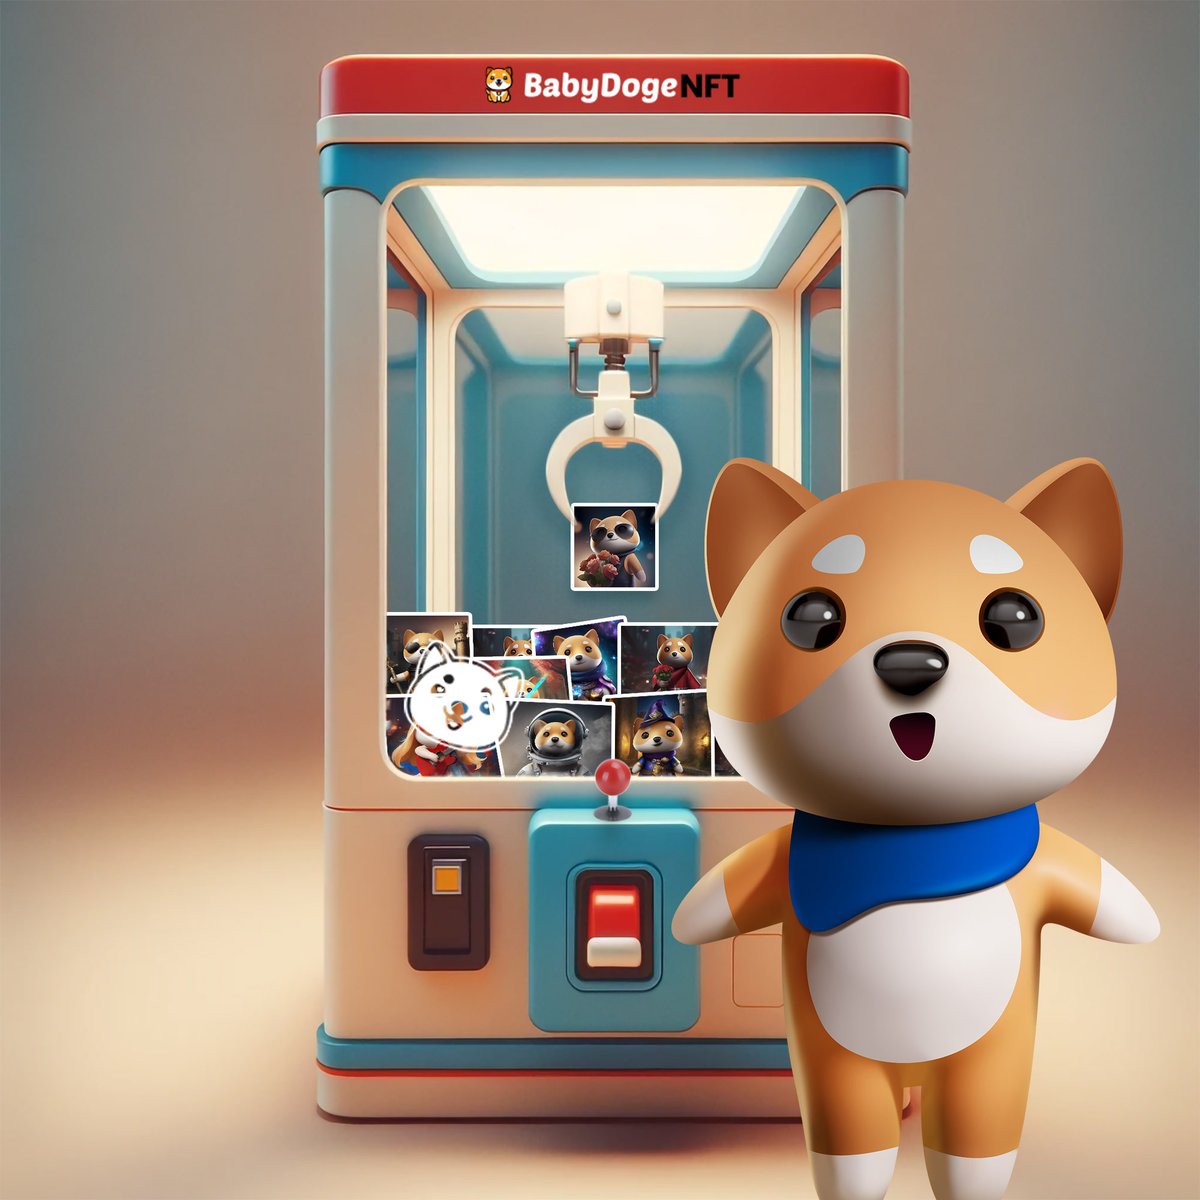 It's almost here, #BabyDogeArmy! The wait is over! Our much-anticipated Baby Doge NFT Marketplace launches Tomorrow! 🎉

Get ready to explore, create, and trade unique AI-generated memes and your favorite NFTs in the vibrant web3 space. Don't miss this!  🎨

#BabyDogeNFT…